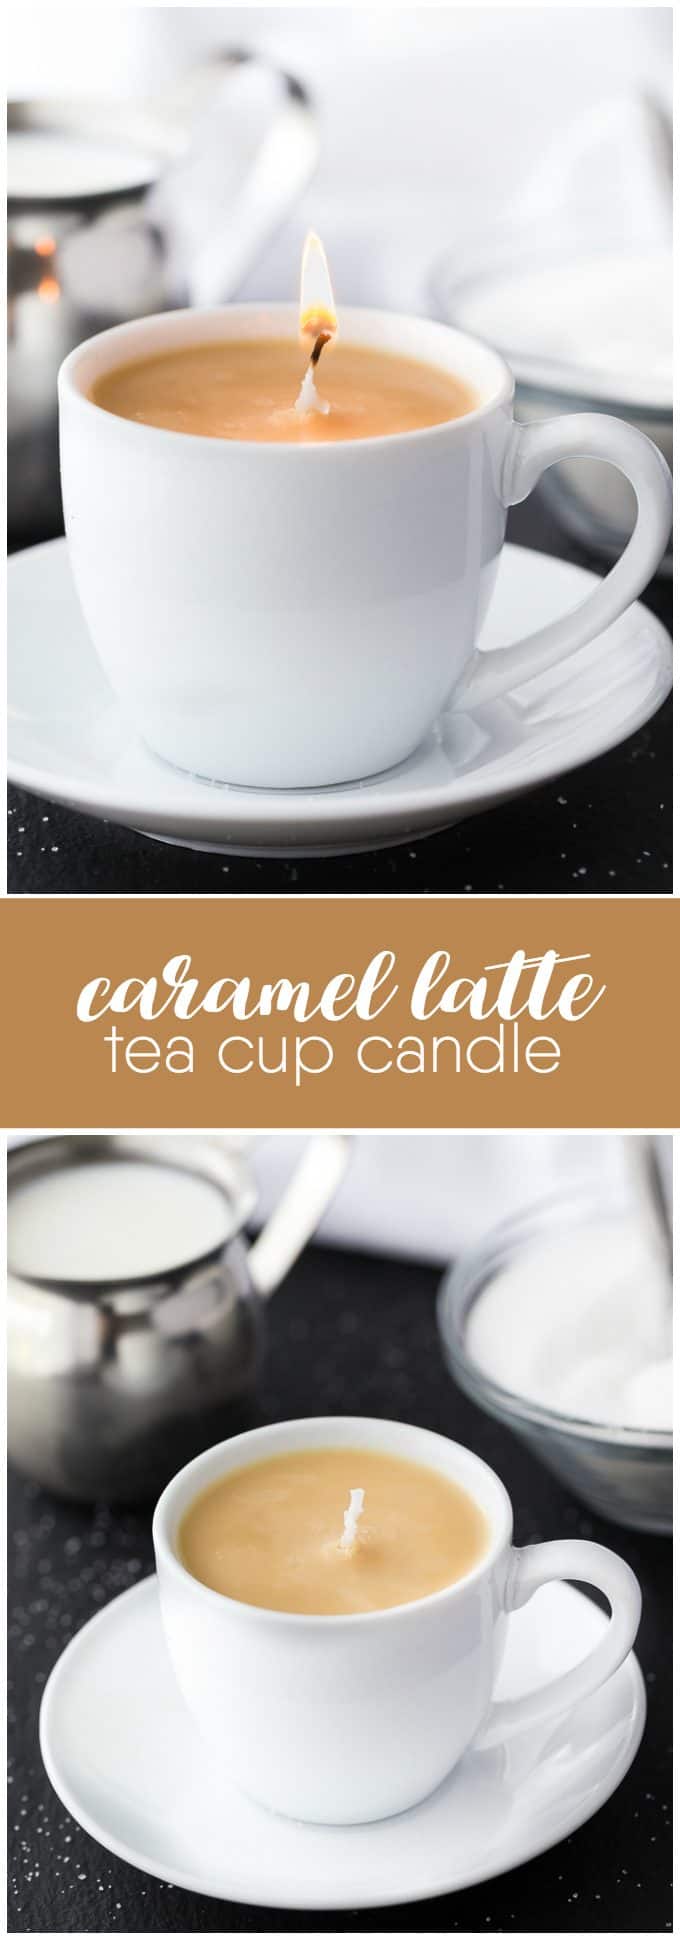 Caramel Latte Tea Cup Candle - A simple DIY gift for a coffee drinker on your holiday gift list. Who knew making candles could be so simple?!